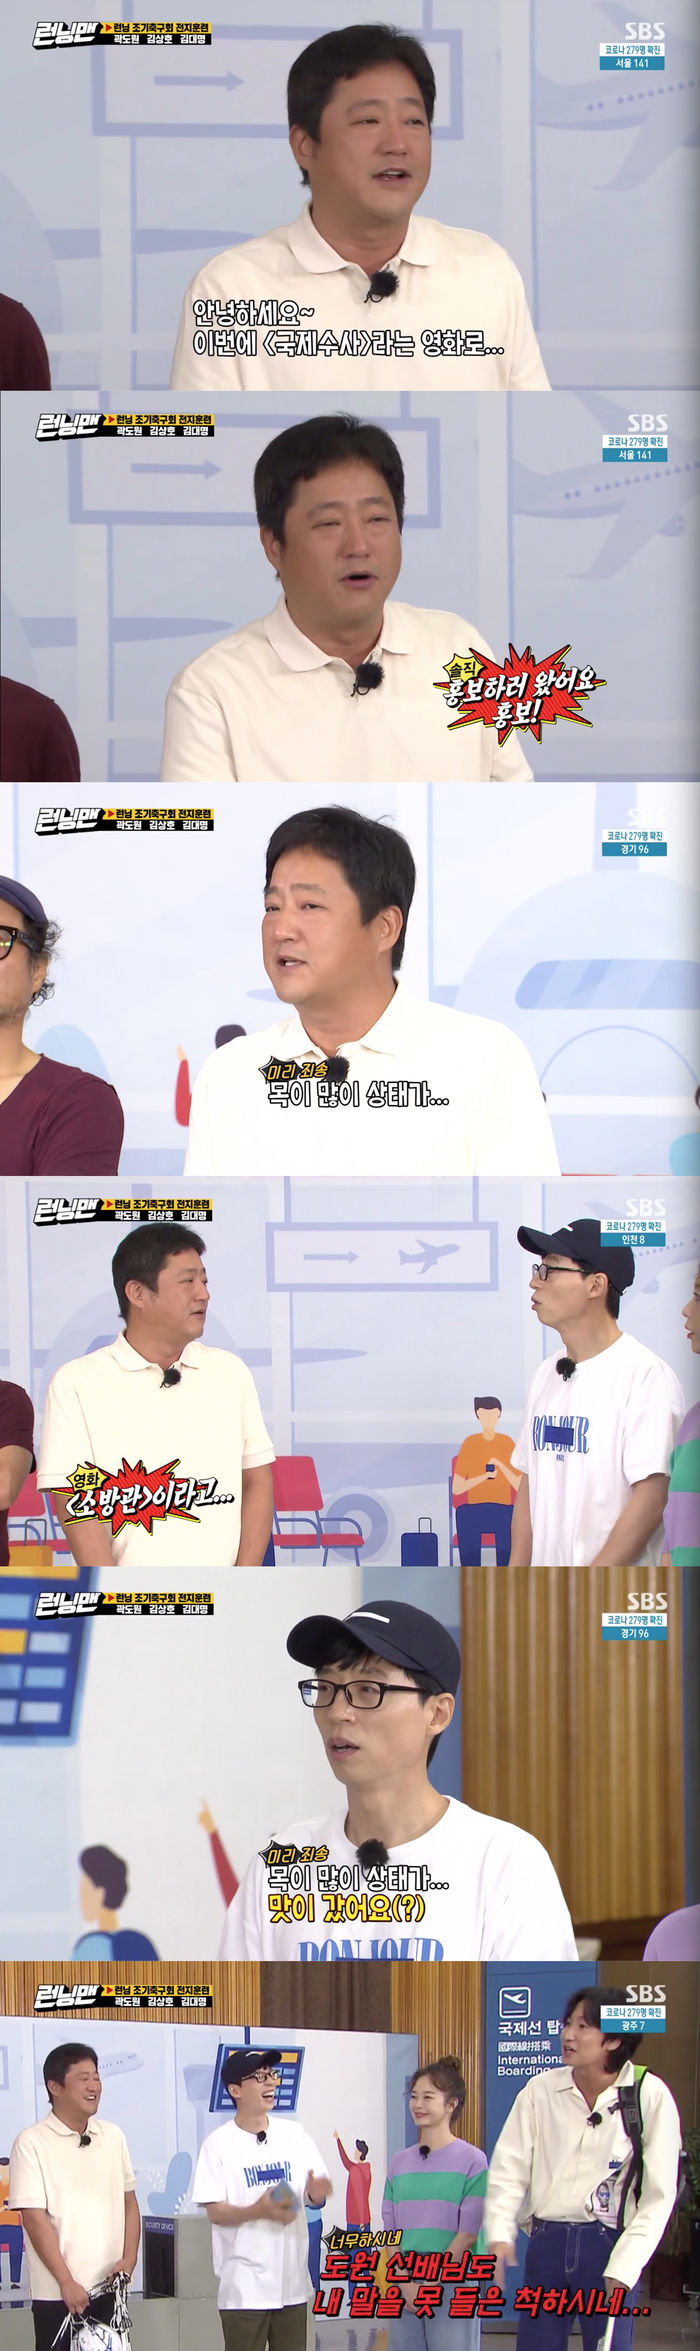 Kwak Do-won has been a big fan of his films.On SBS Running Man broadcasted on the 16th, Kwak Do-won, Kim Sang-ho and Kim Dae-myeong of the movie International Susa appeared as guests.On the day of the broadcast, the members asked, Why did you bring a soccer ball? Then Kwak Do-won laughed, saying, I do not know, I told you to take it.The members laughed, saying, If you go to football early, you will have such a person.Kwak Do-won then said, Hello, I came to promote this time with an international Susa movie. He revealed the reason for his frank appearance and attracted Eye-catching.Yoo Jae-Suk explained, After steel ratio 2, you have appeared in the movie to international Susa.Kwak Do-won said, In fact, Yesterday also asked me to understand that I had a lot of necks after I filmed all night.Yoo Jae-Suk asked what filming he had done all night, and Kwak Do-won said he had been filming Firefighter and attracted Eye-catching.Lee Kwang-soo said, What is so amazing is that you promoted three movies in 20 seconds. Yoo Jae-Suk said, Ya quiet quiet, and Lee Kwang-soo stopped talking and Lee Kwang-soo burst.And Lee Kwang-soo said, Dowon is pretending not to hear me. At this time, Yoo Jae-Suk said, Did you come to our YouTube?, referring to a clip by Yoo Jae-Suk that cuts Lee Kwang-soos words uploaded to YouTube.